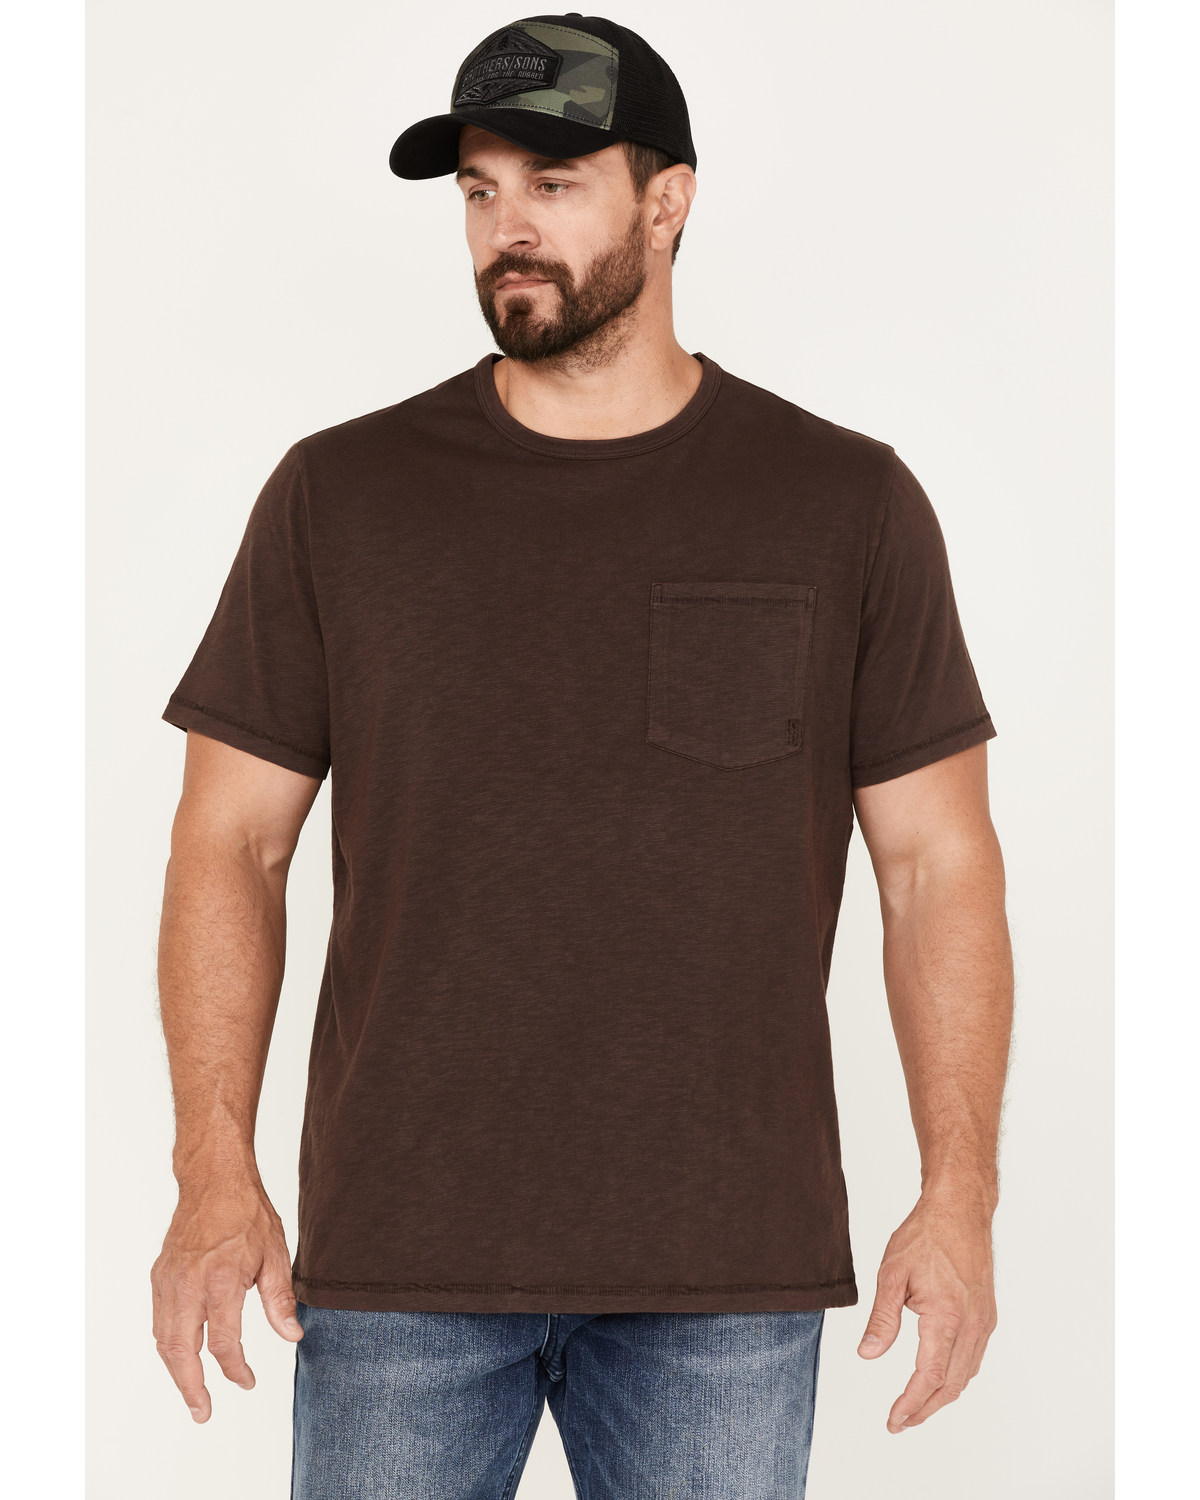 Brothers and Sons Men's Basic Pocket T-Shirt